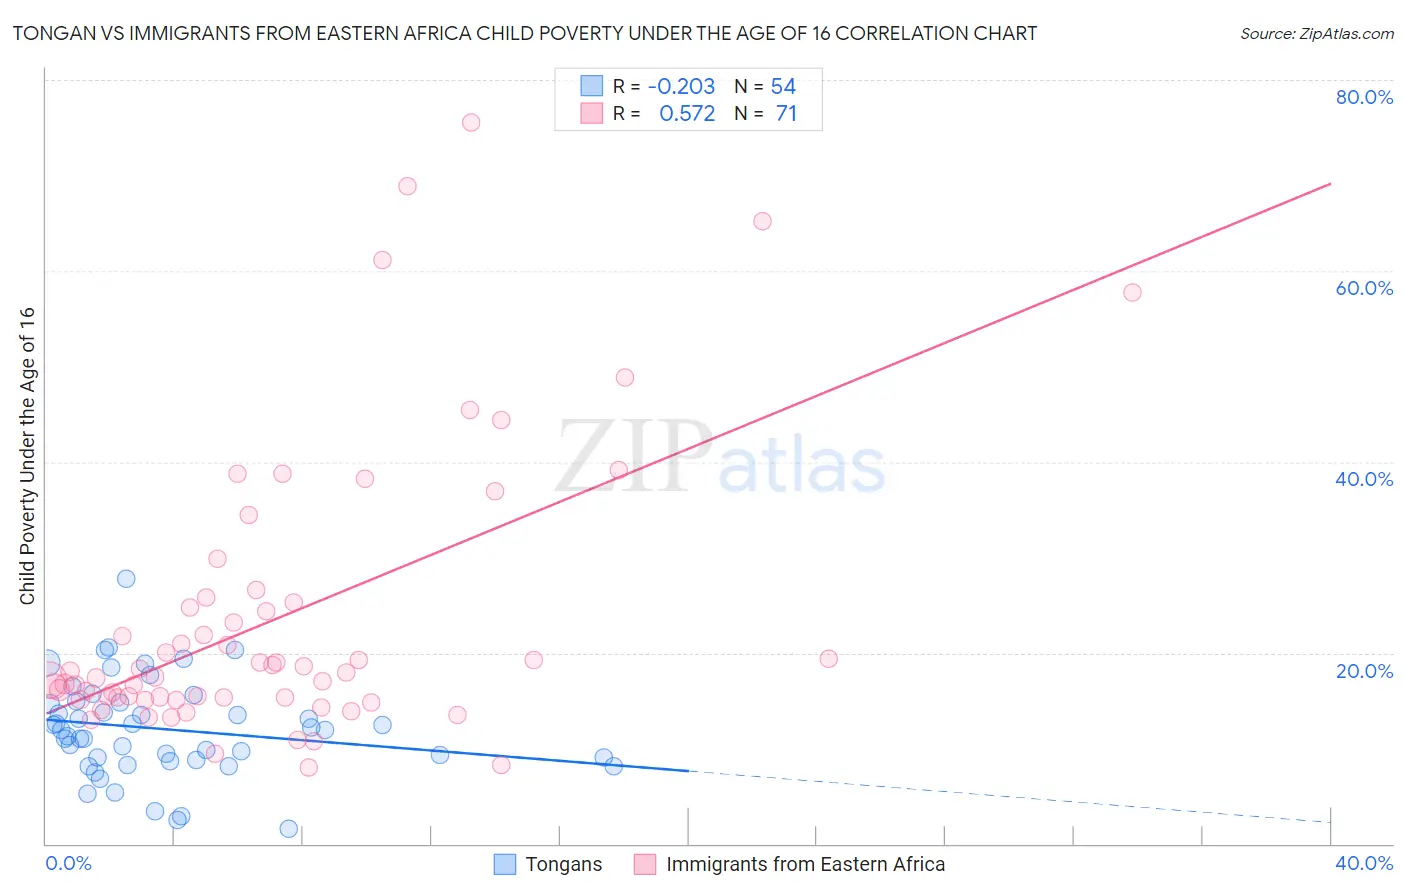 Tongan vs Immigrants from Eastern Africa Child Poverty Under the Age of 16